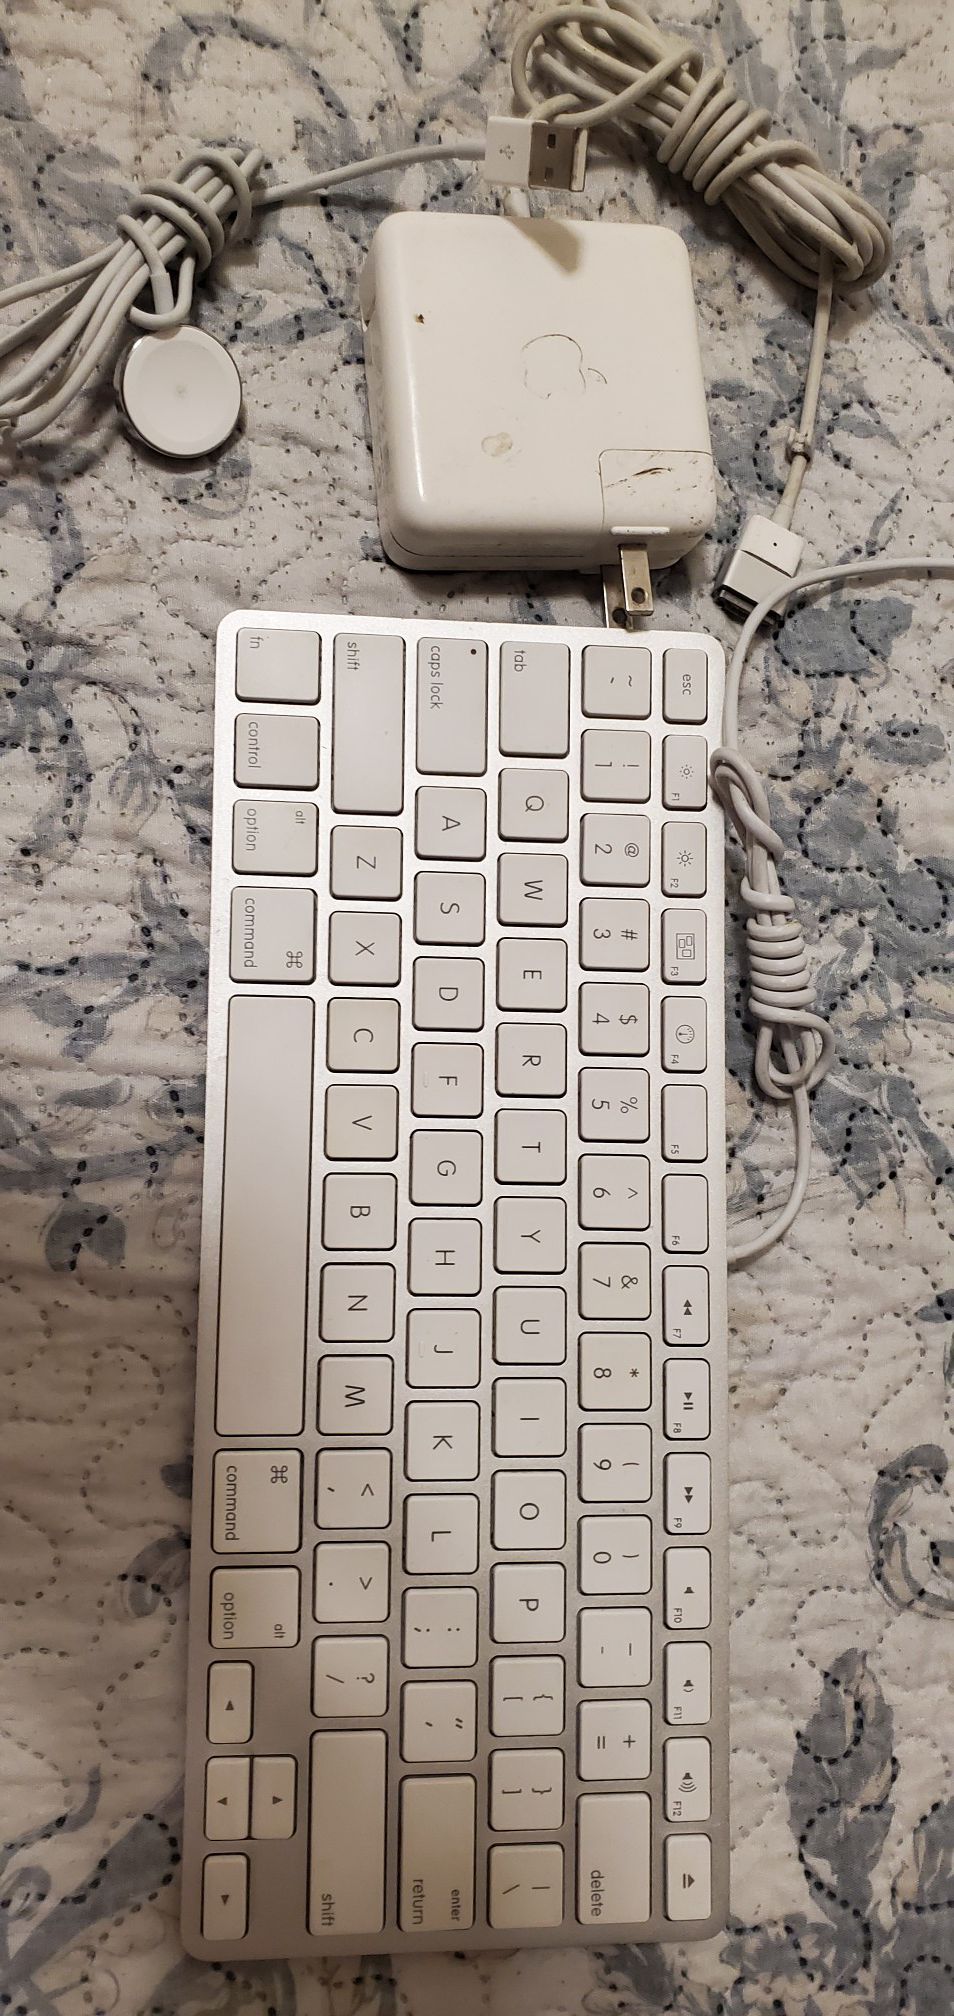 Keyboard mac, charger macbook, charger apple watch